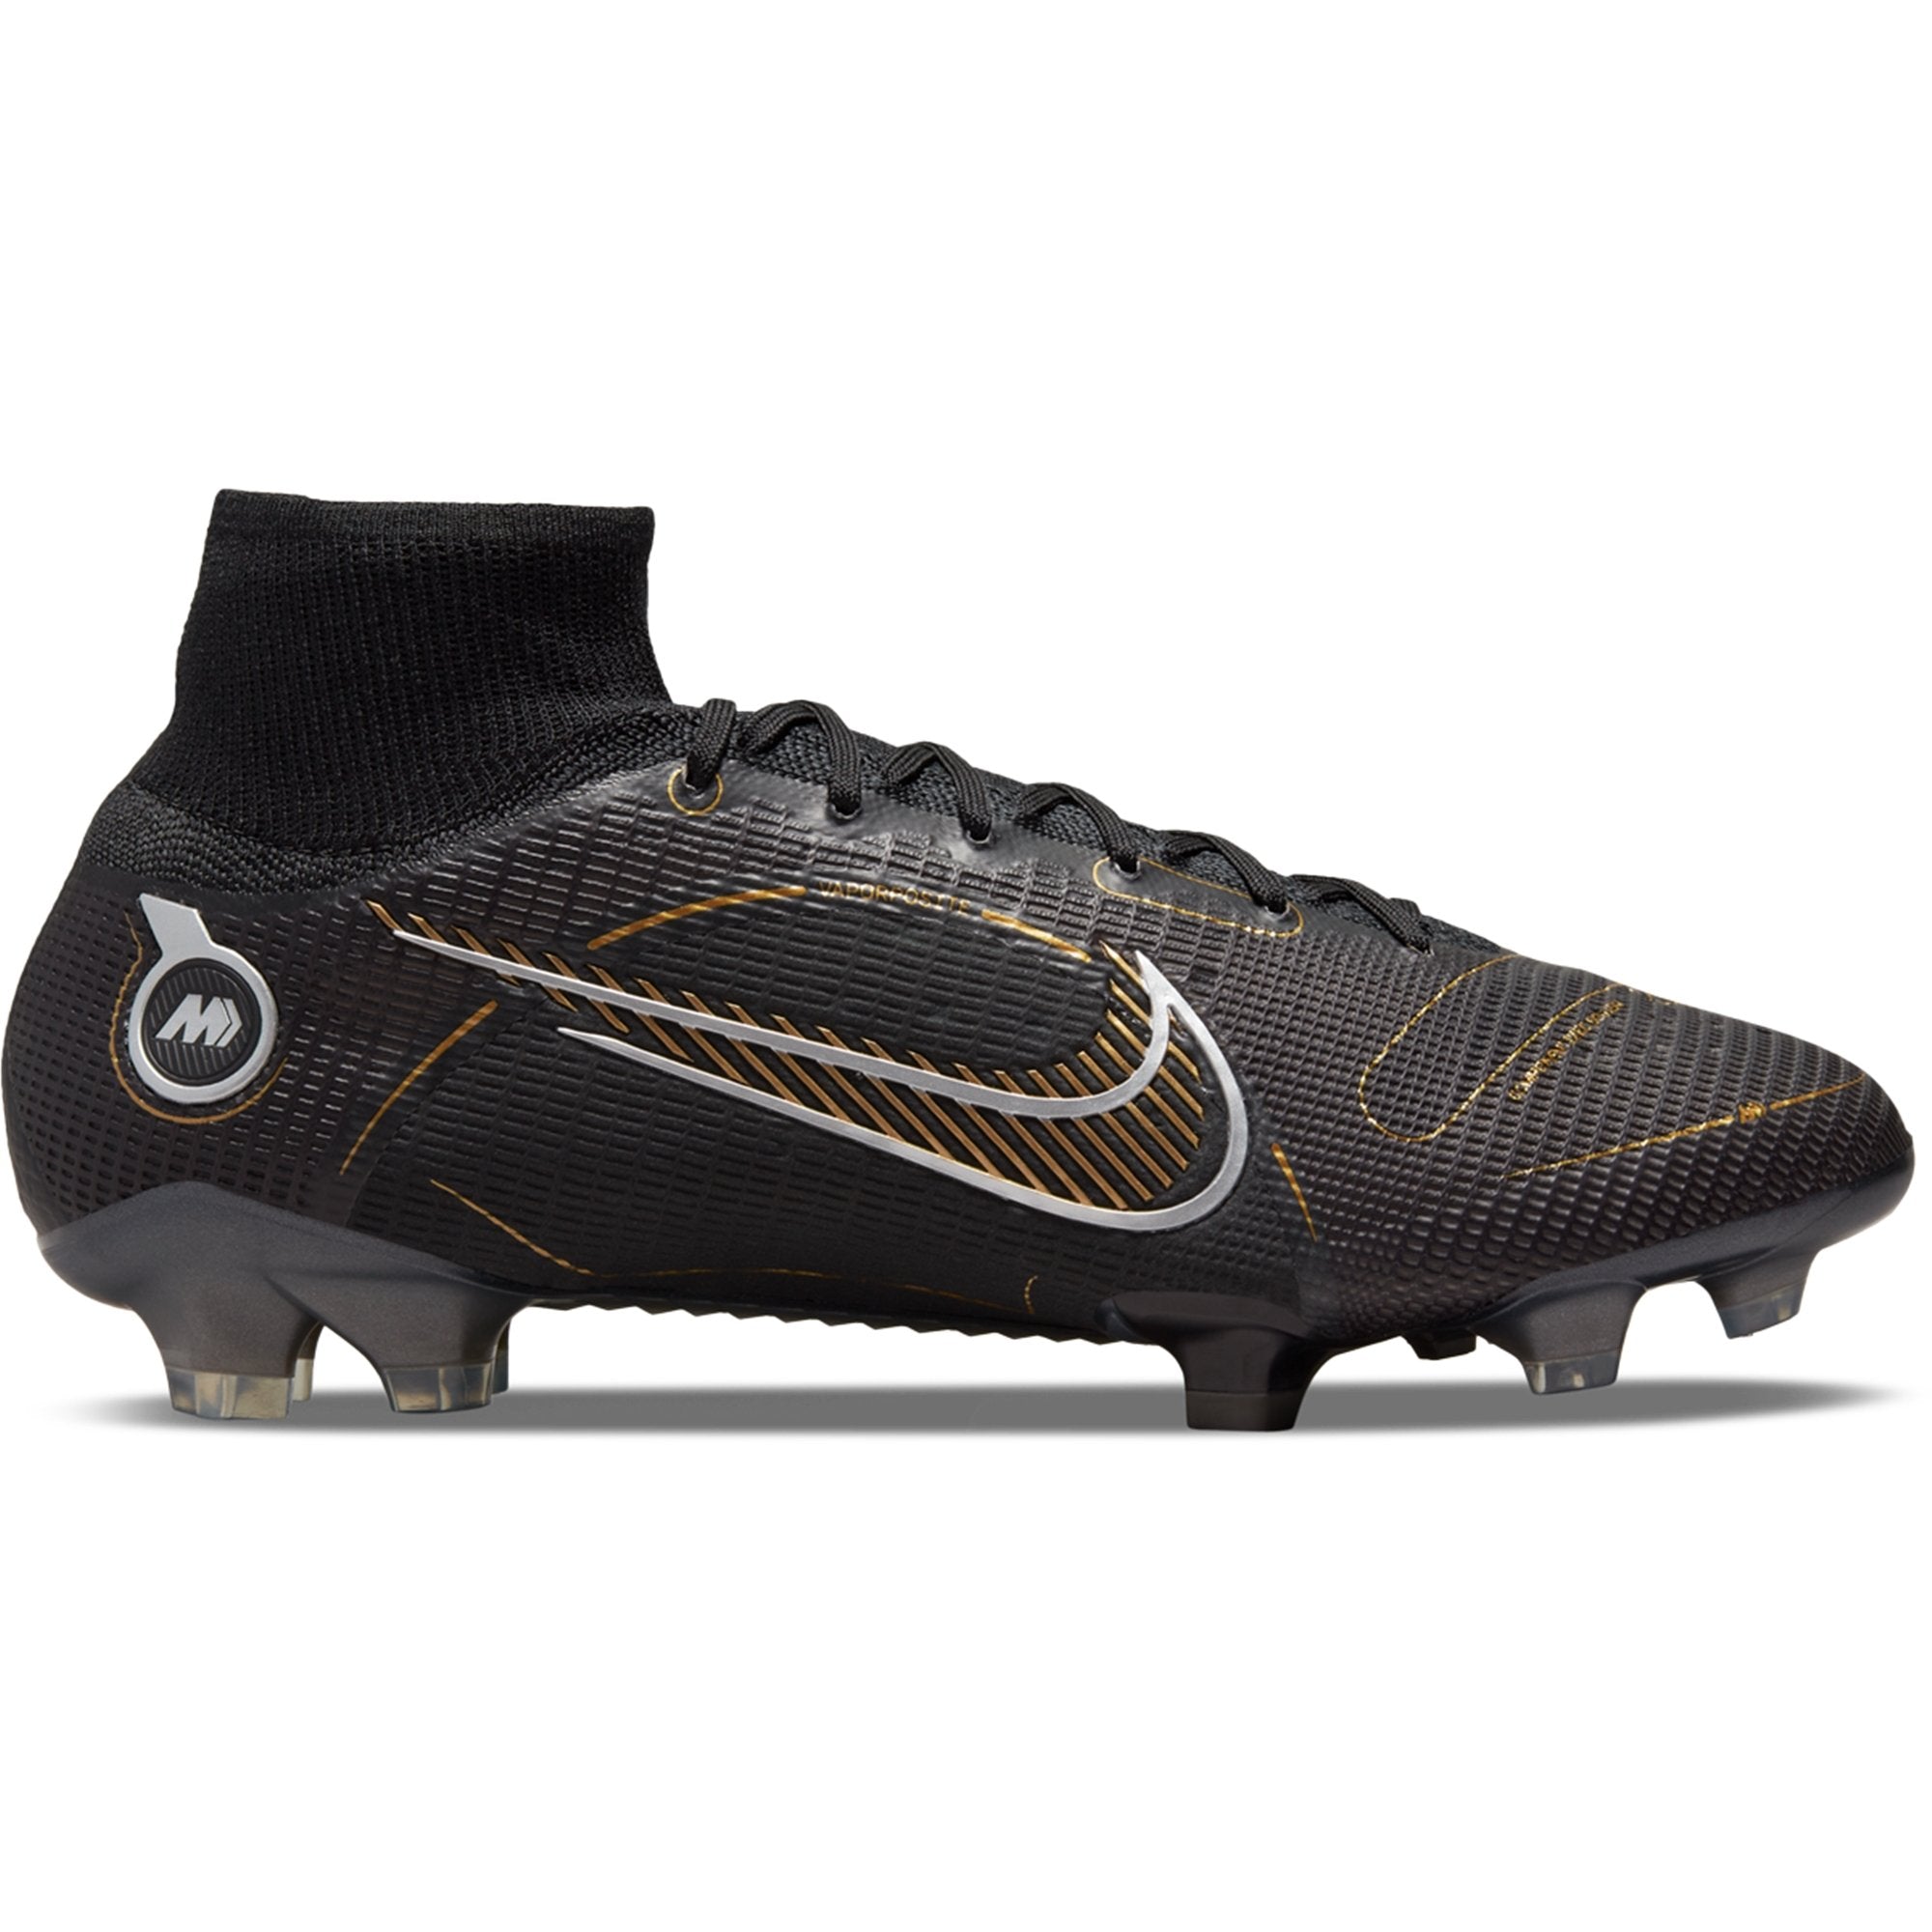 Nike Mercurial Superfly FG Firm Ground Soccer Cleat Black/Metallic Gold/Metallic Silver/Cave Stone/Ash DJ2839-007 – Zone USA